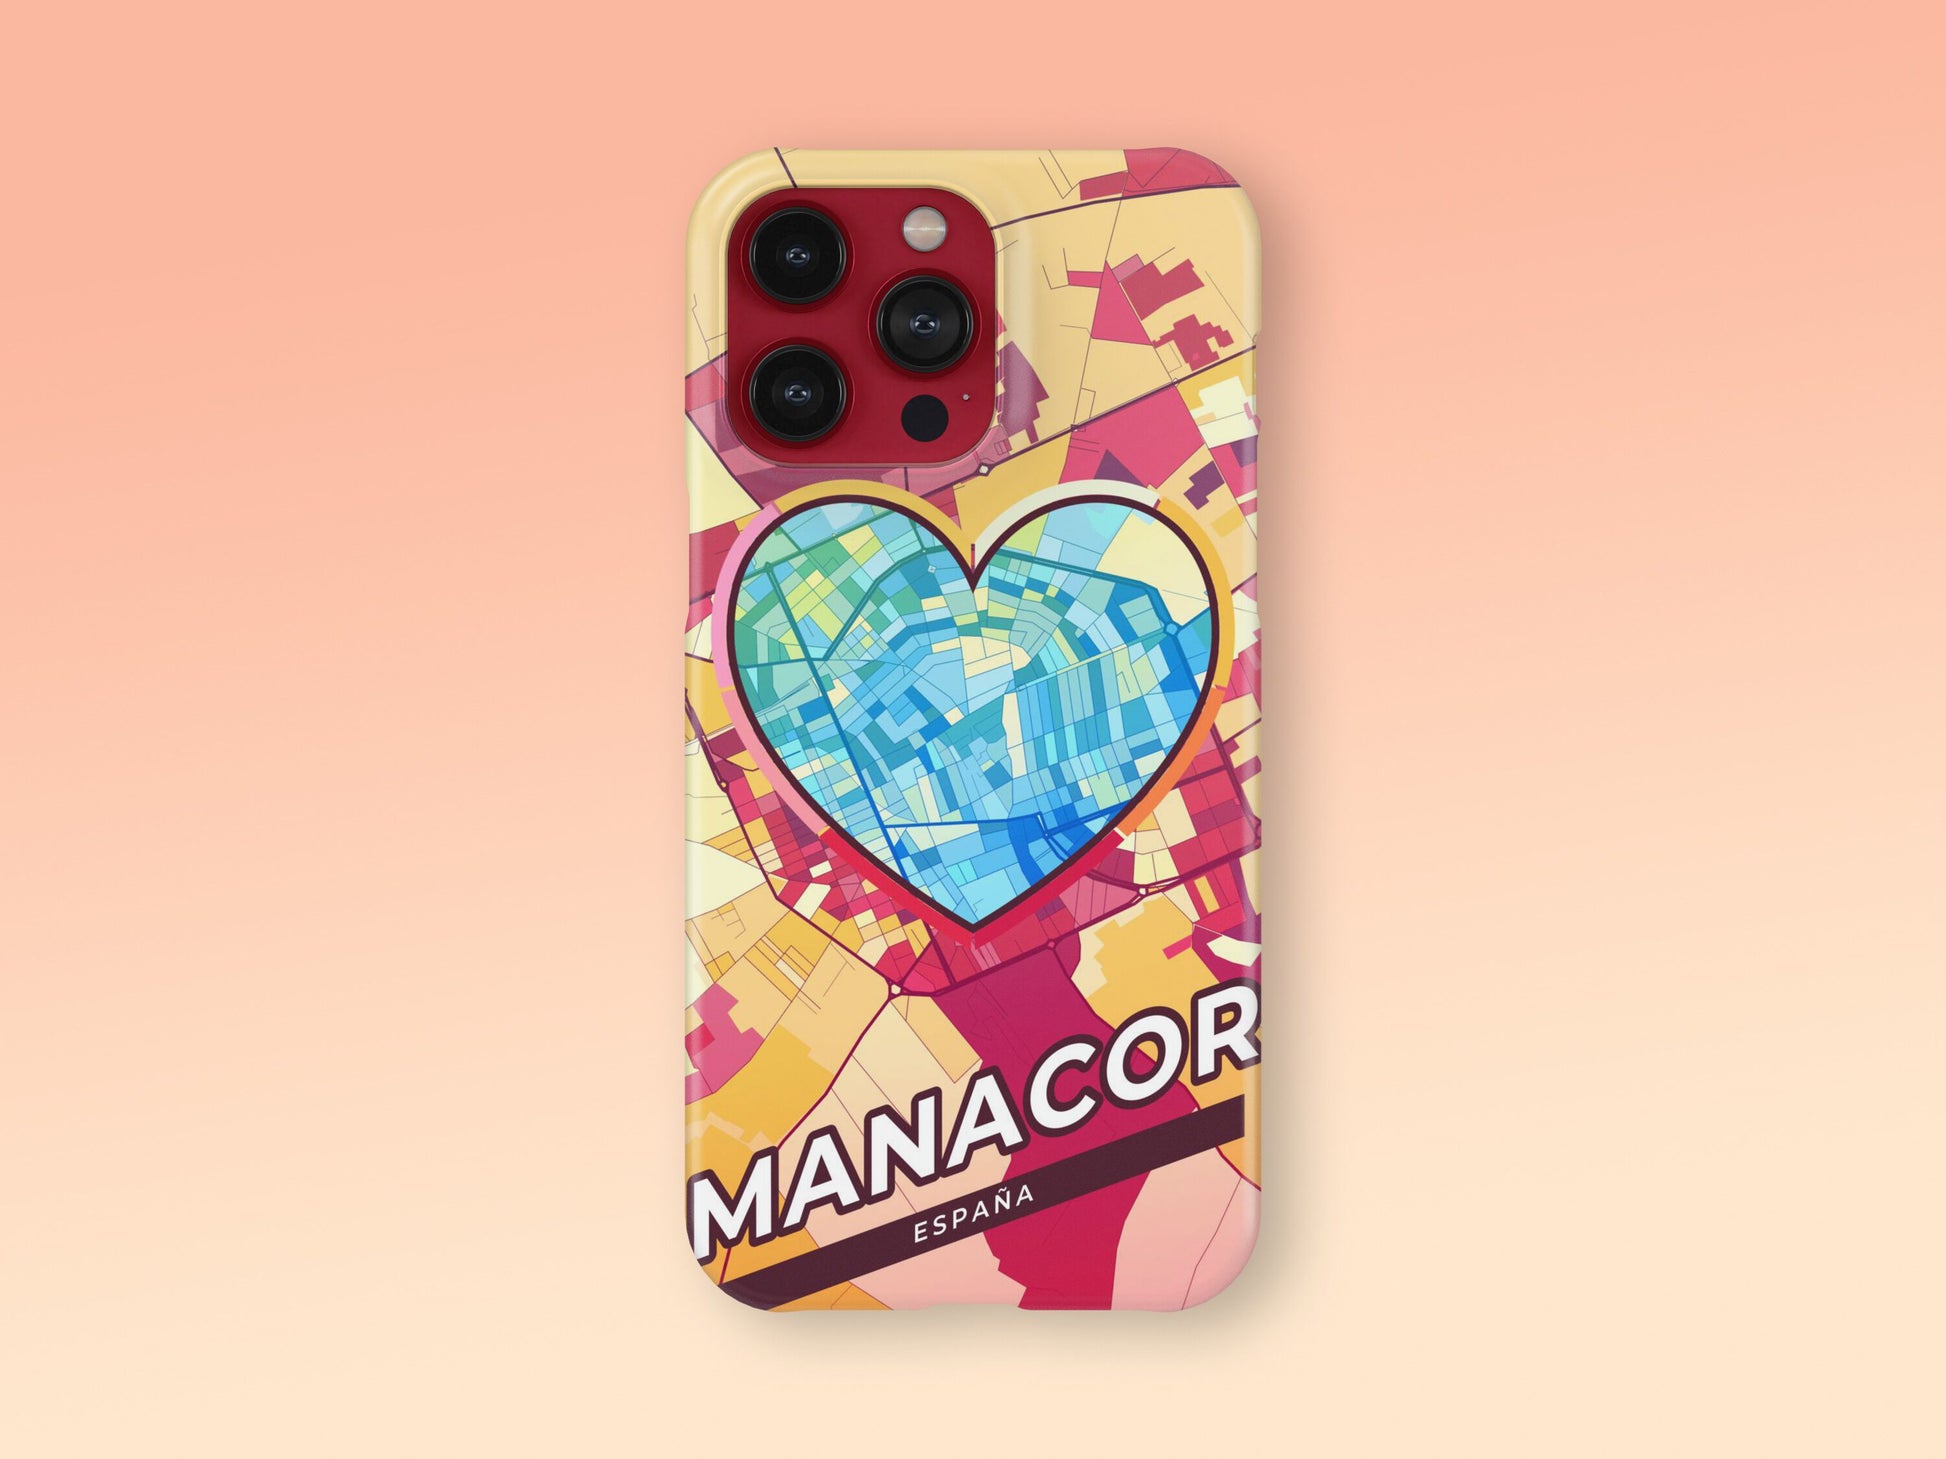 Manacor Spain slim phone case with colorful icon. Birthday, wedding or housewarming gift. Couple match cases. 2